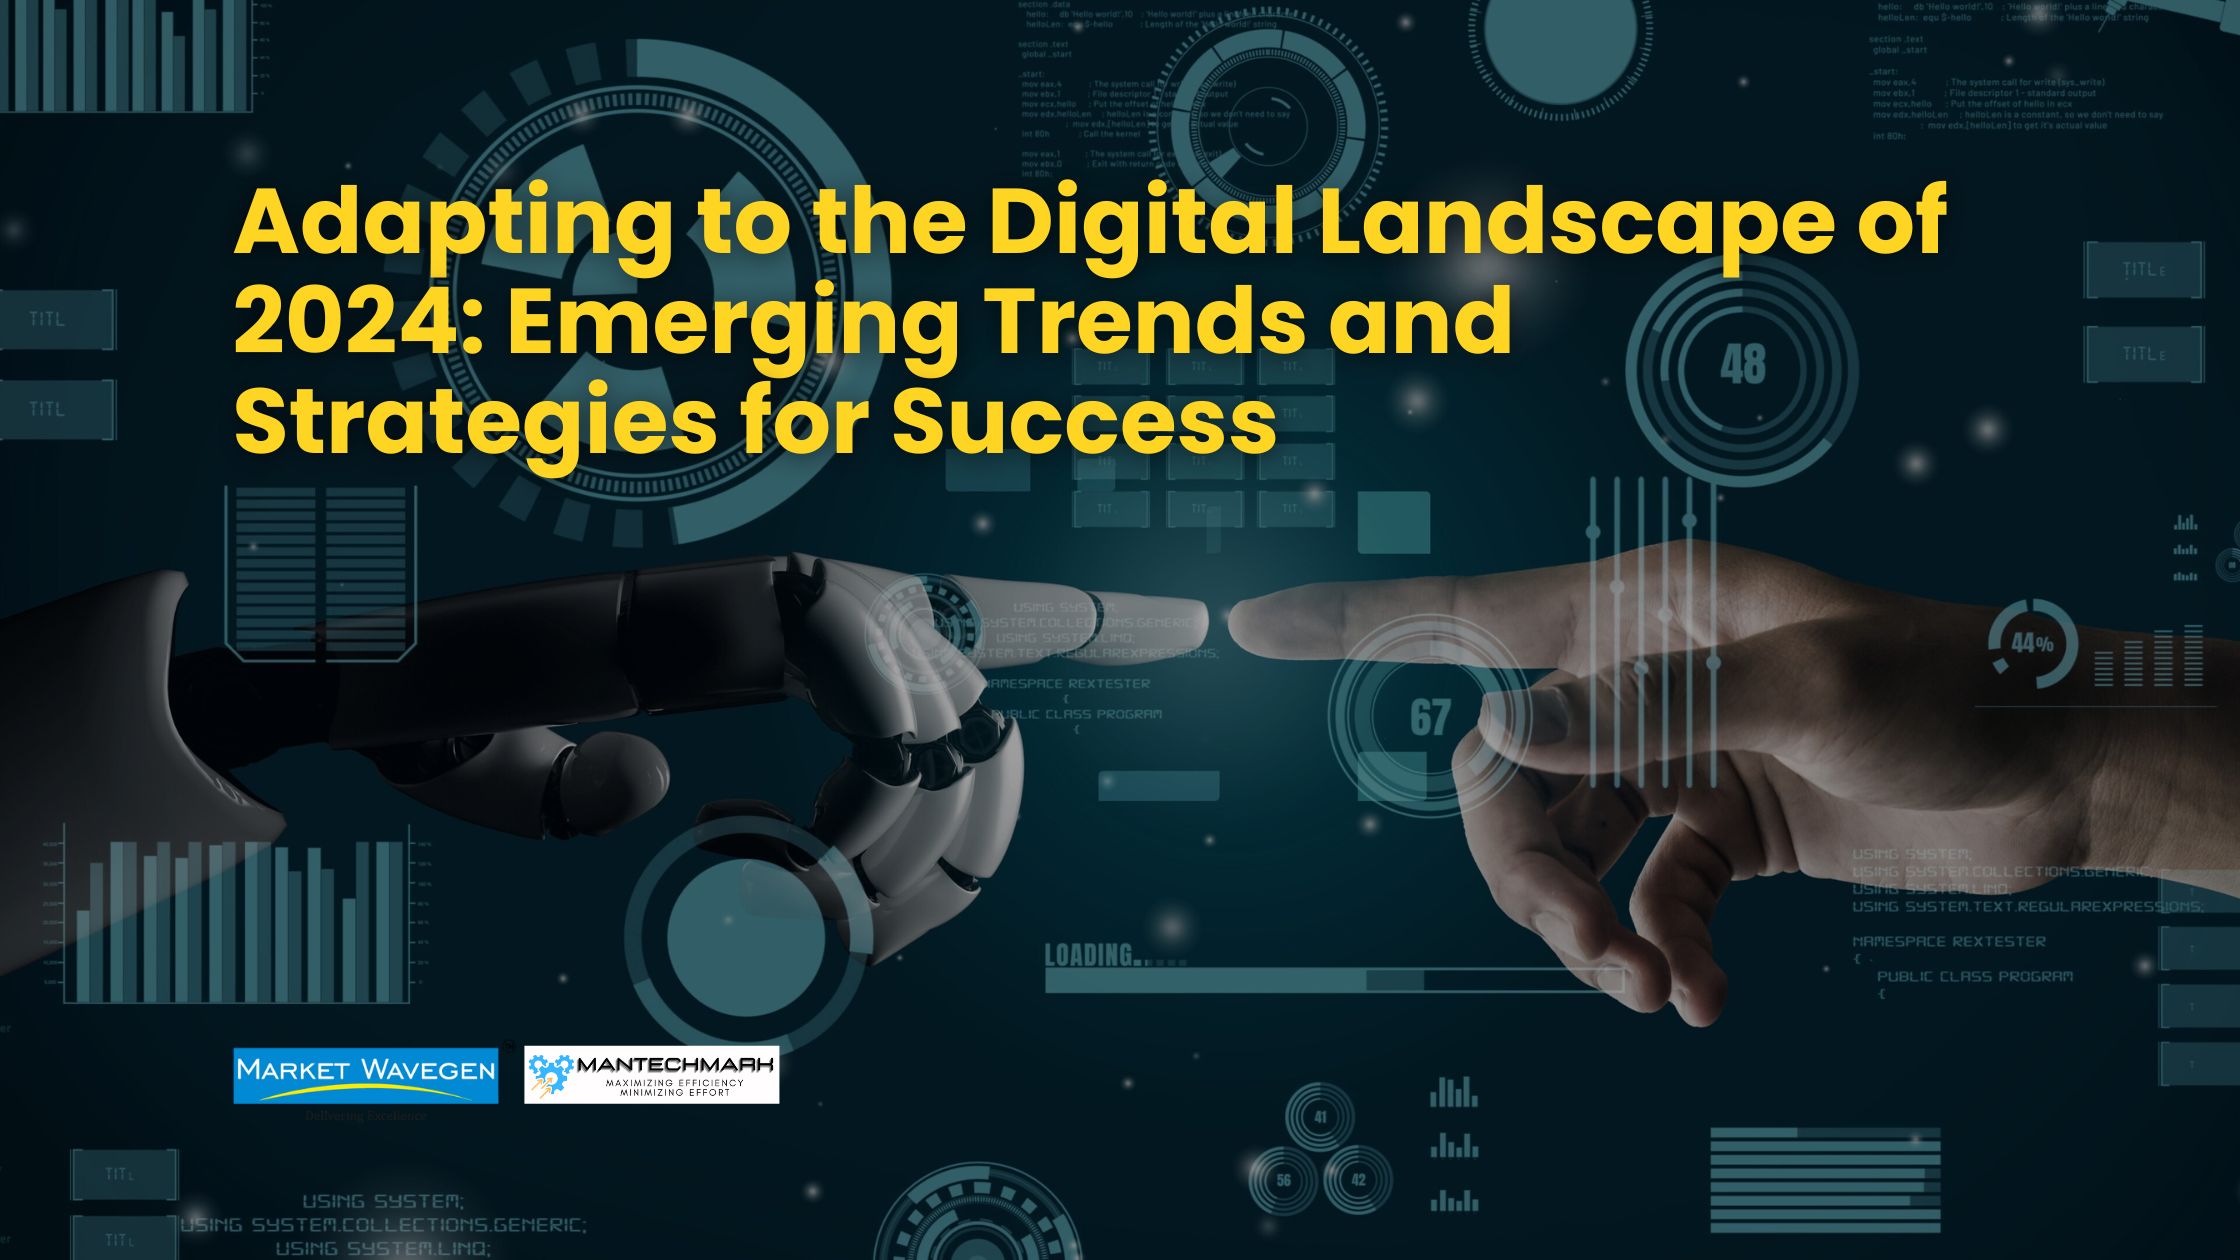 Adapting to the Digital Landscape of 2024: Emerging Trends and Strategies for Success